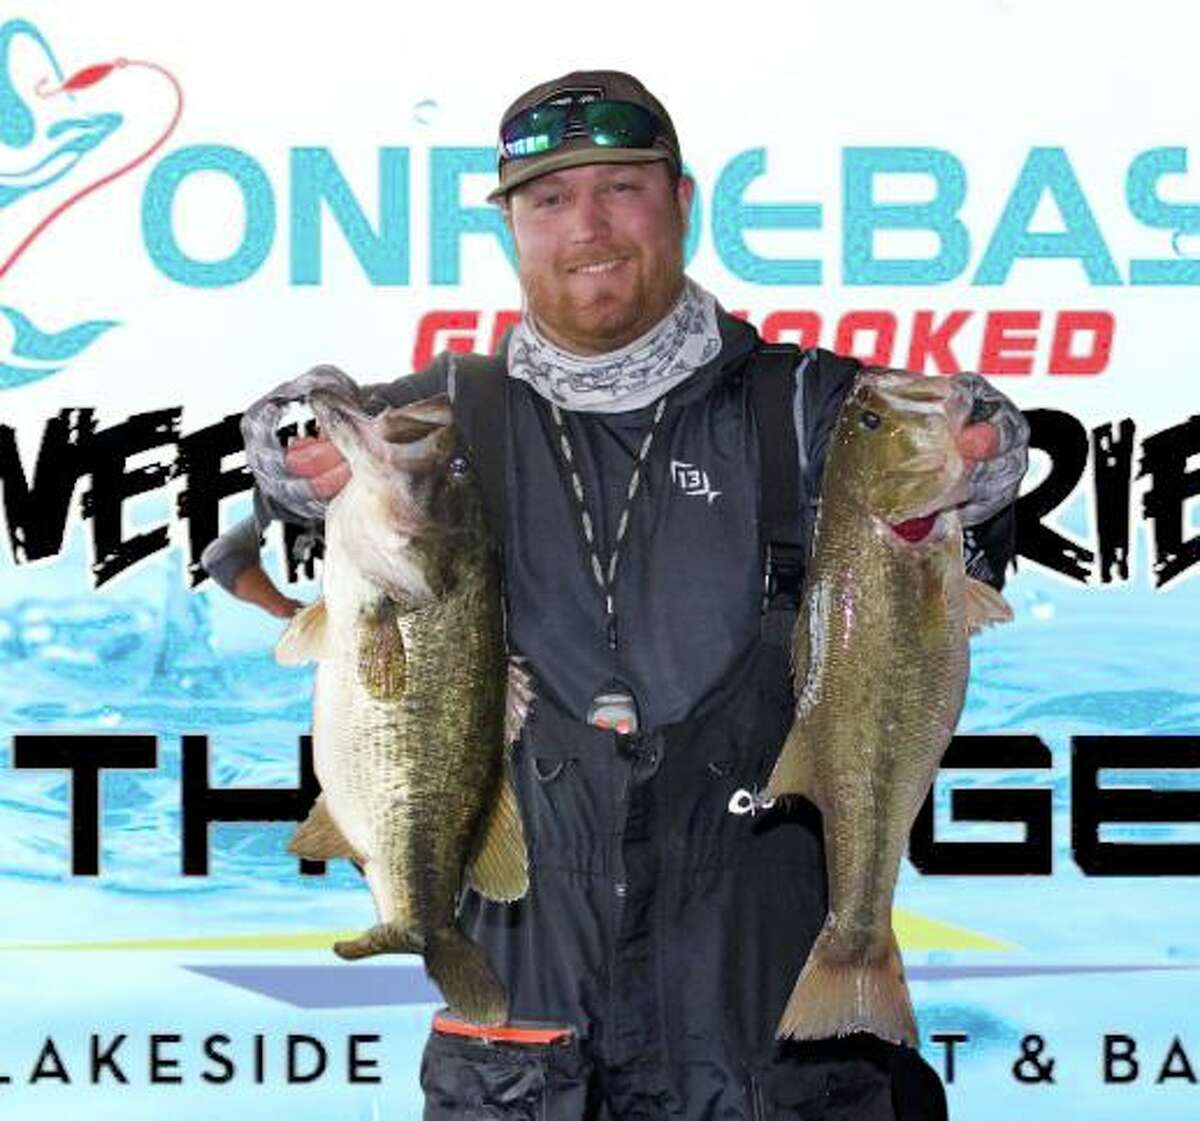 Bo Brown came in third place in the CONROEBASS Weekend Series Tournament with a stringer weight of 17.93 pounds.